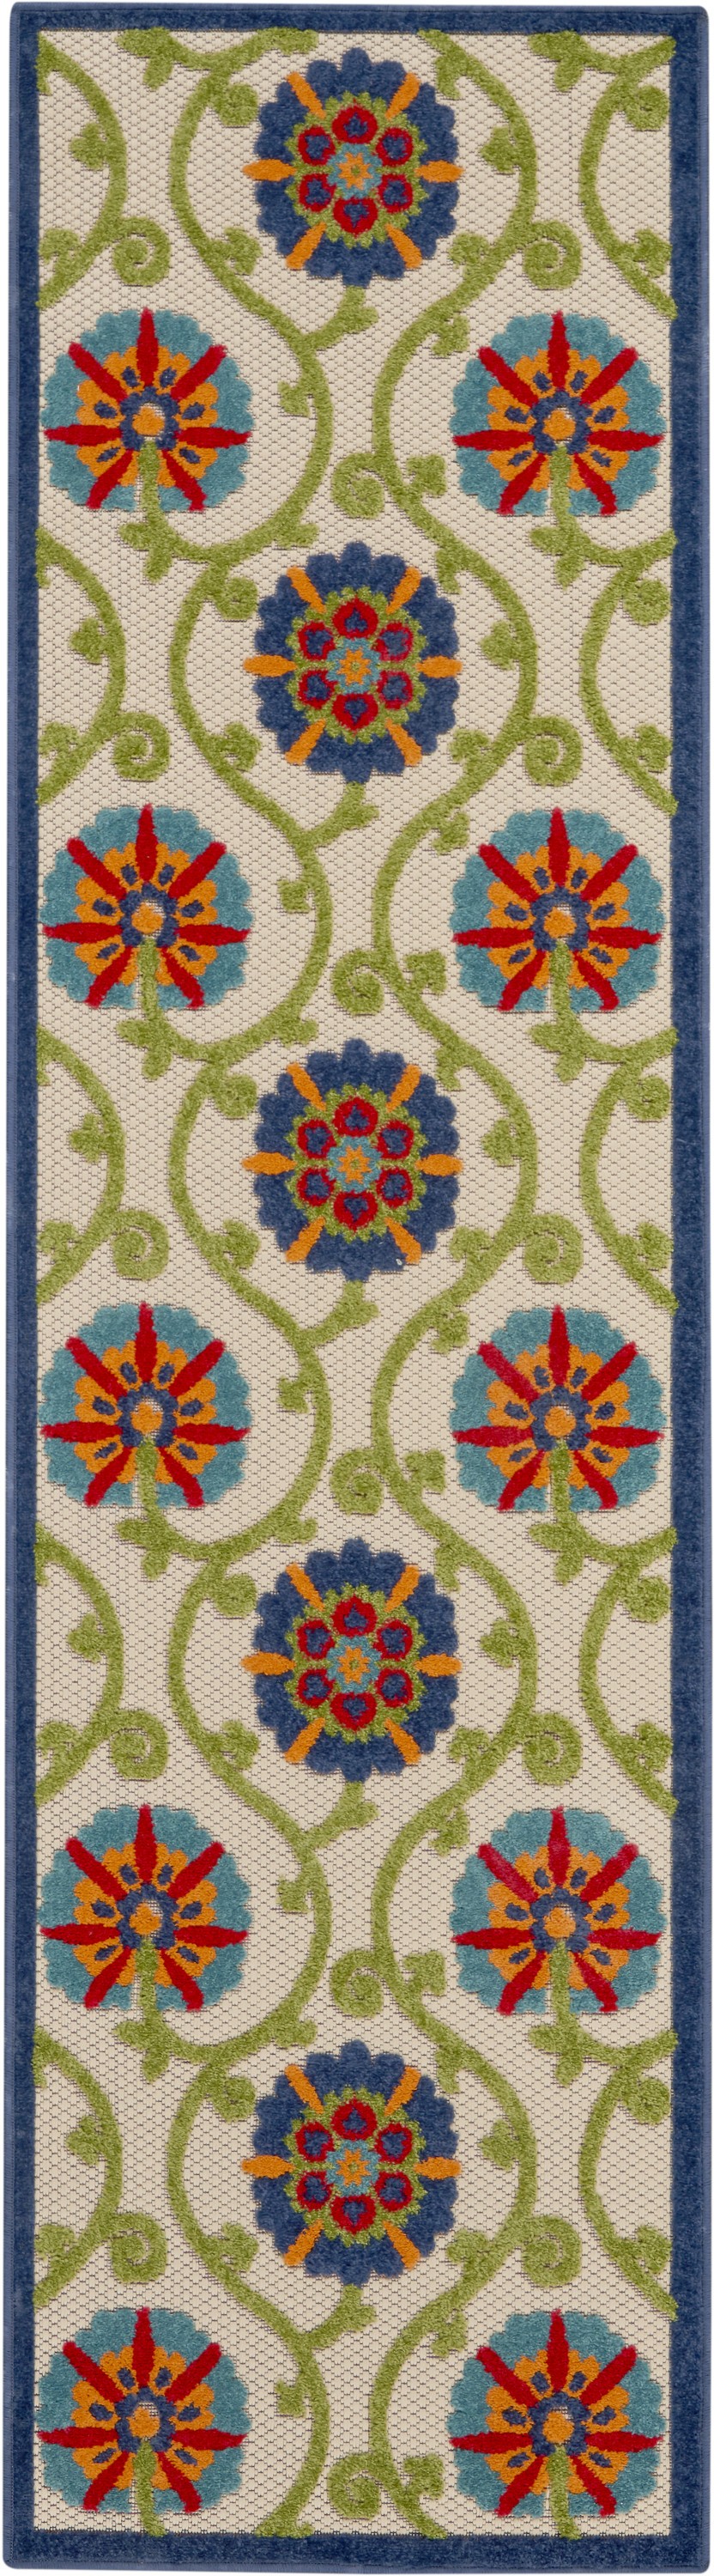 2' X 6' Ivory And Blue Floral Indoor Outdoor Area Rug-384967-1